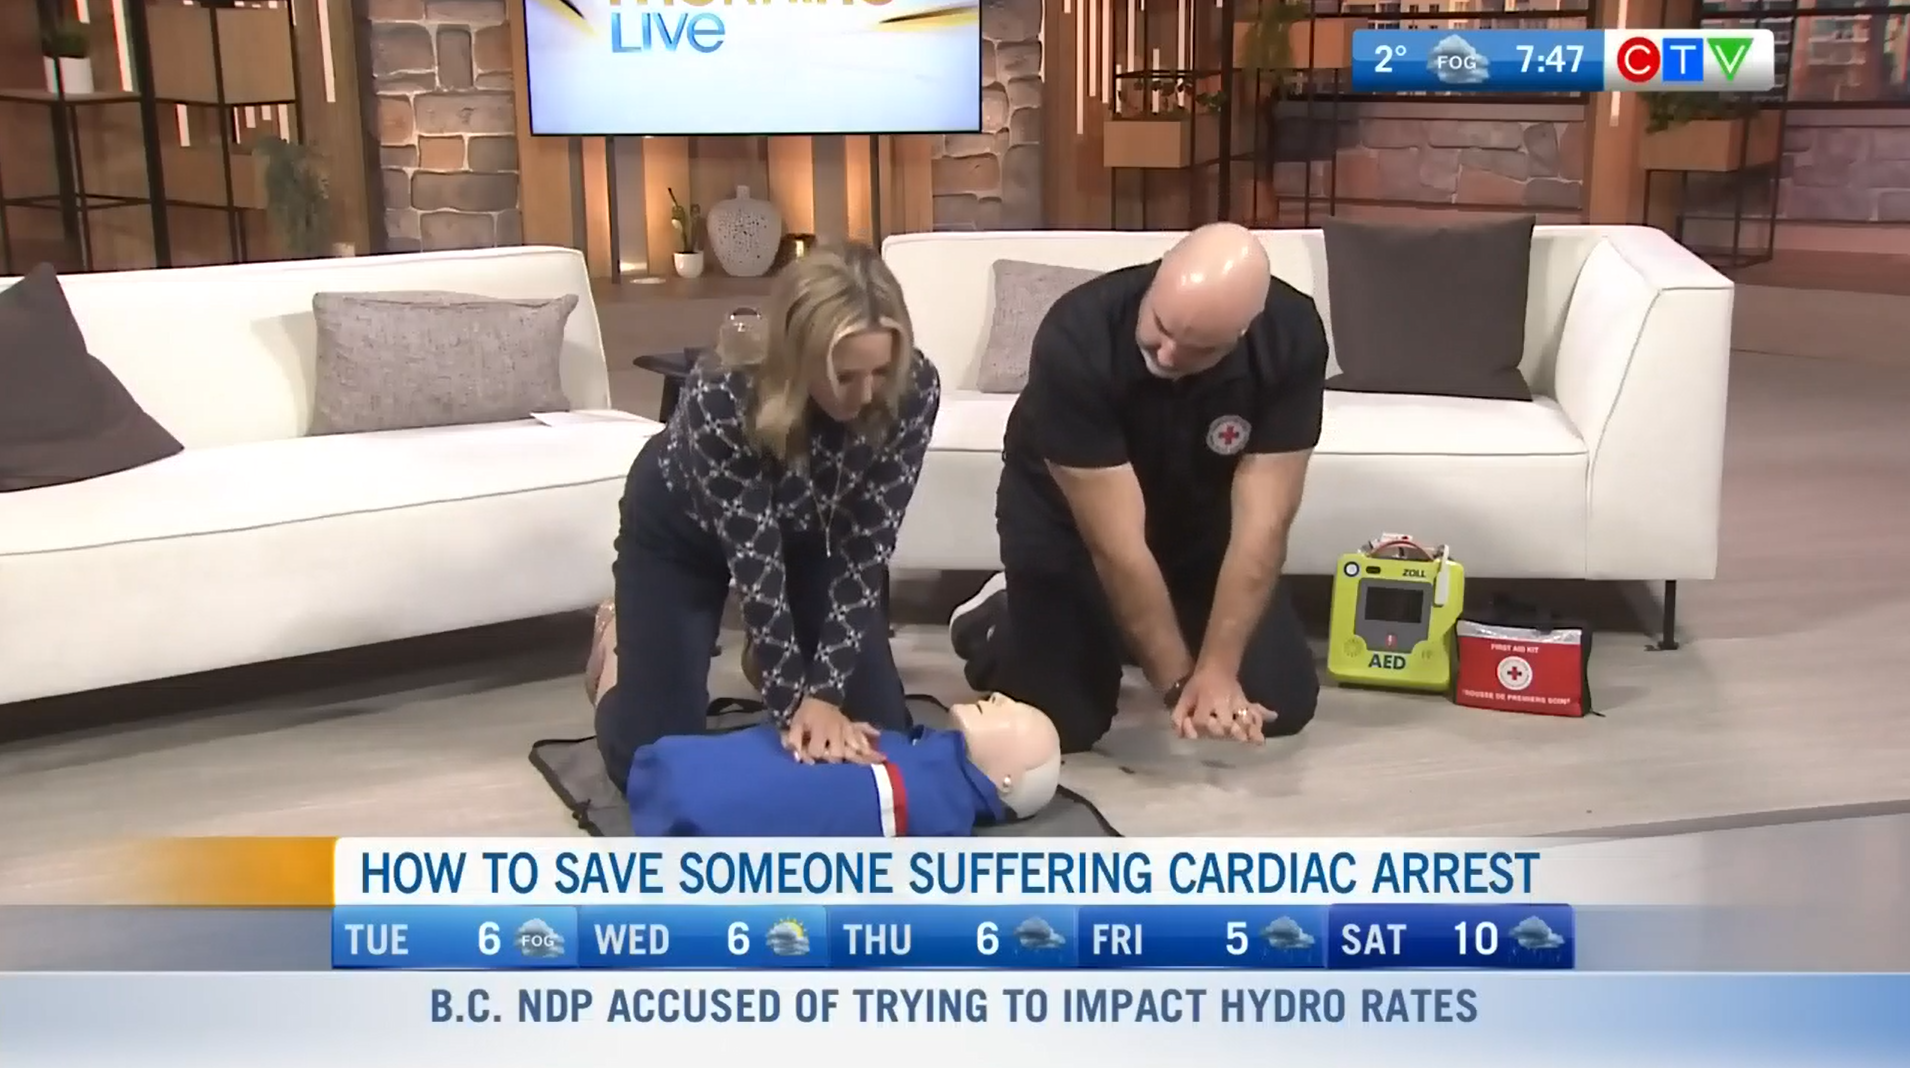 CTV News How to Save a Person in Cardiac Arrest